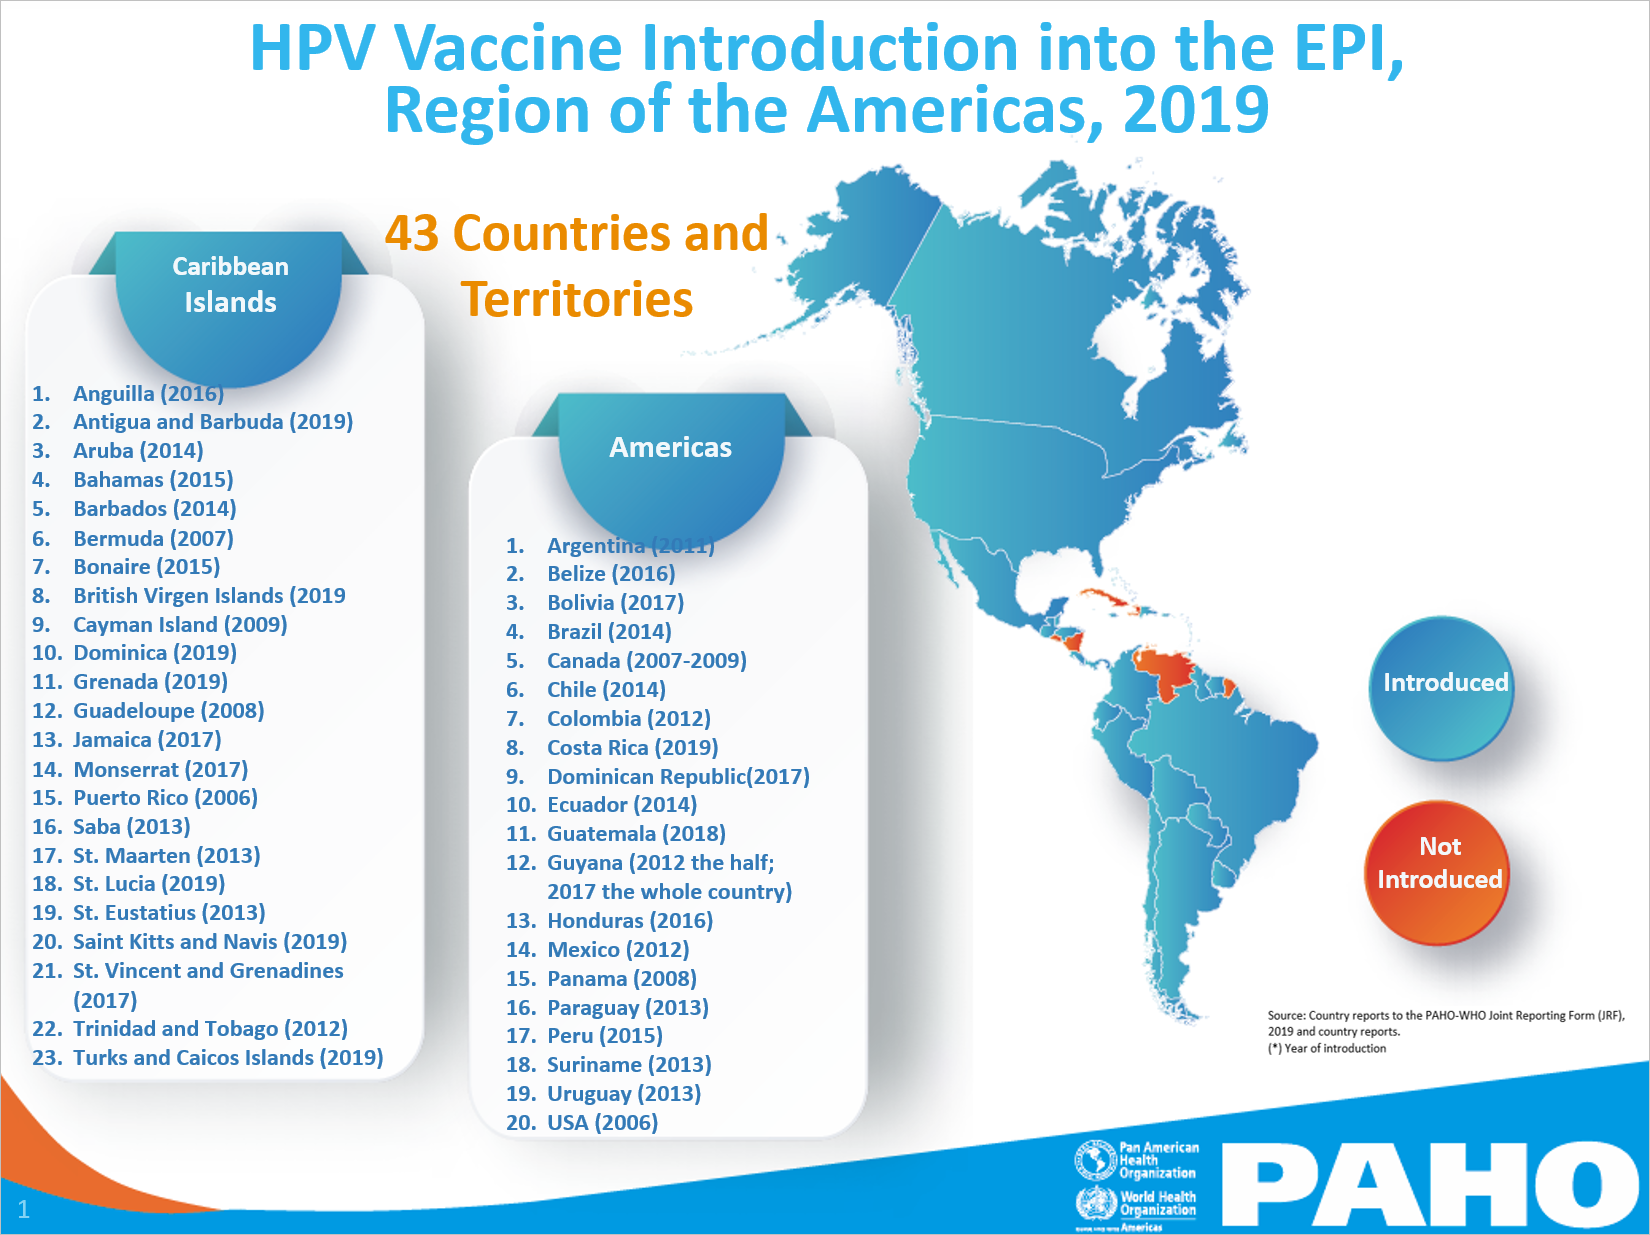 HPV vaccine introduction